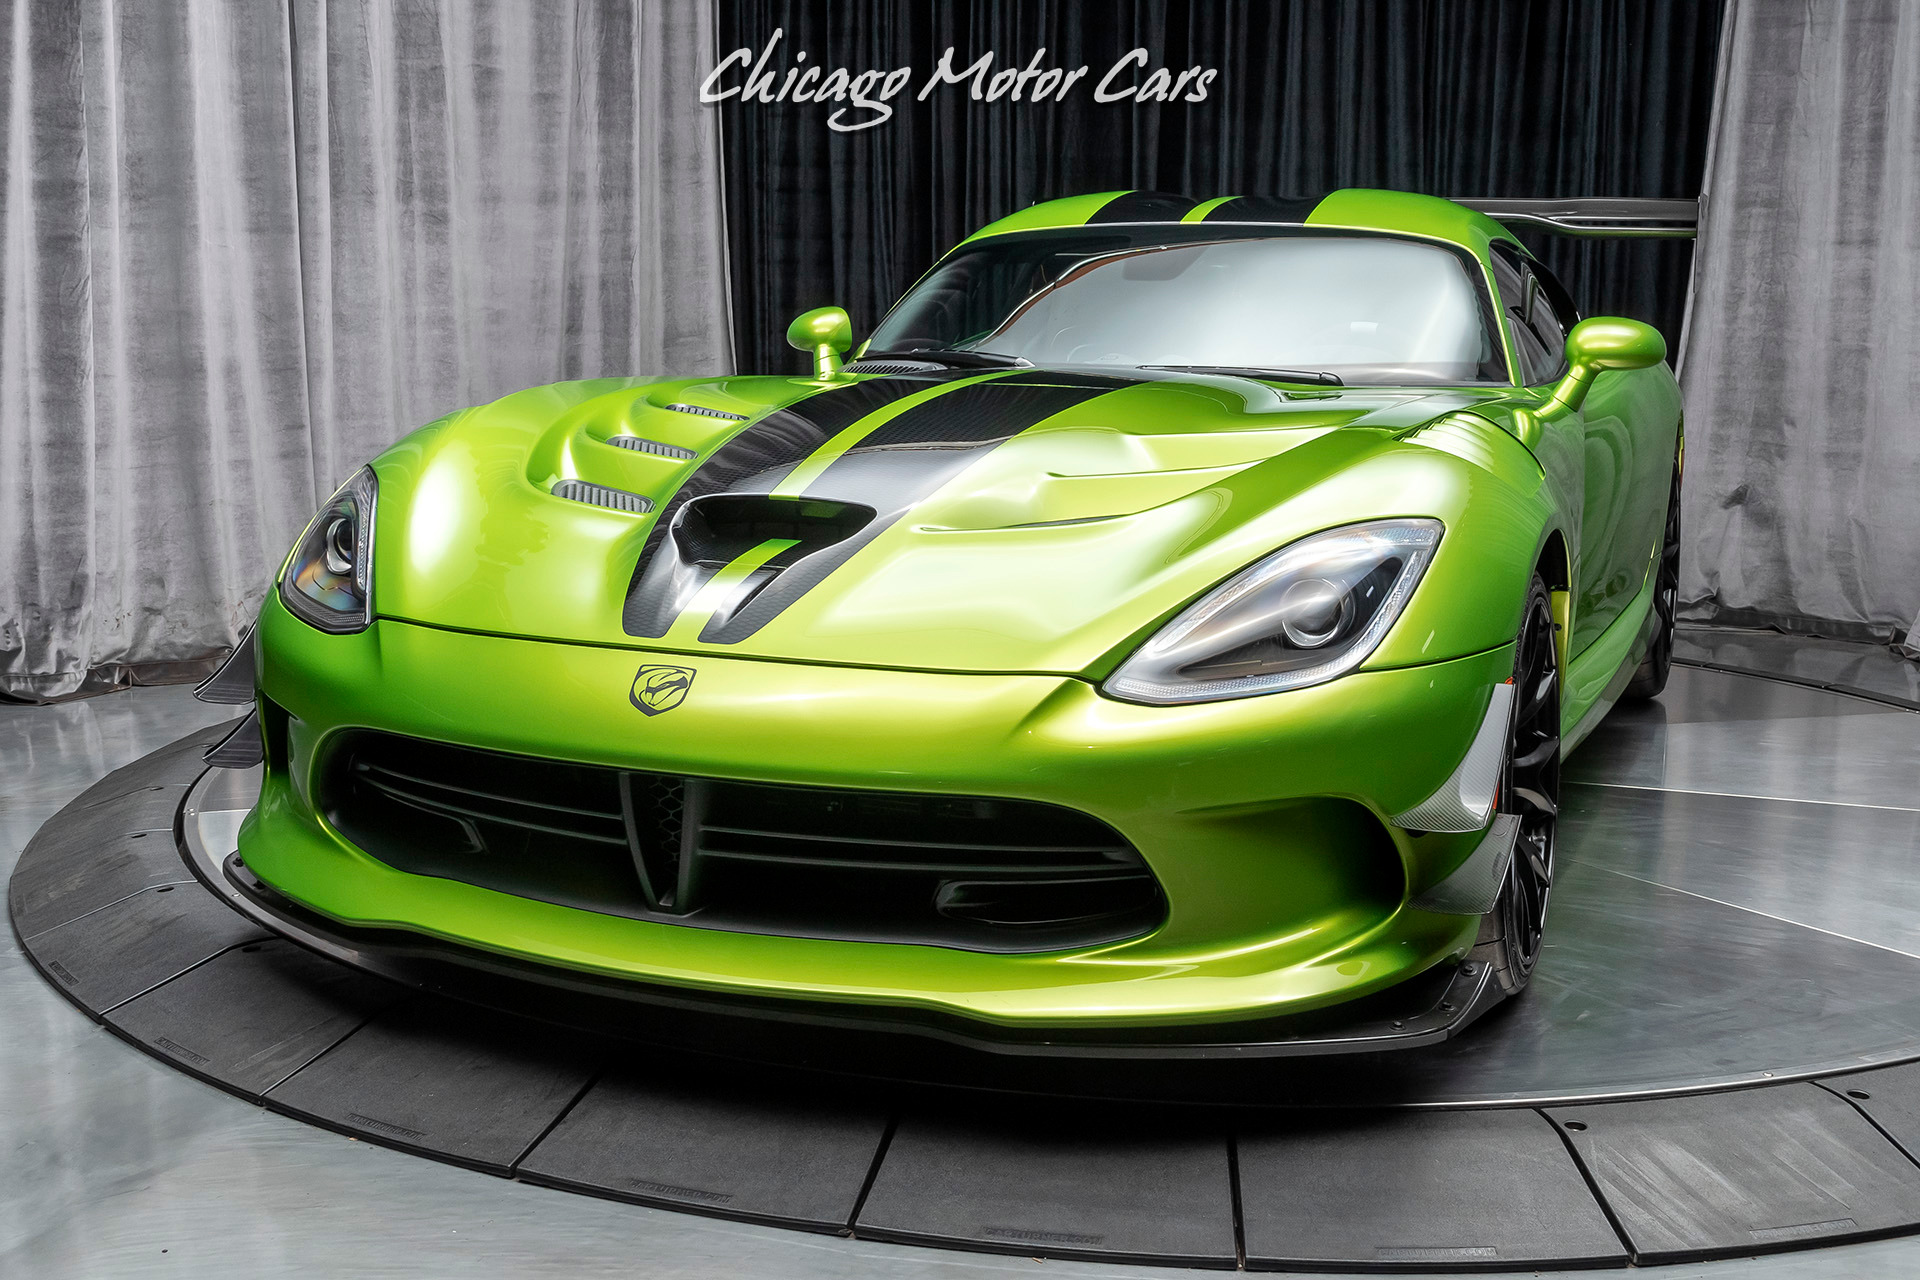 Used-2017-Dodge-Viper-ACR-Extreme-Aero-SNAKESKIN-Edition-Pkg-Only-86-Miles-Collector-Quality